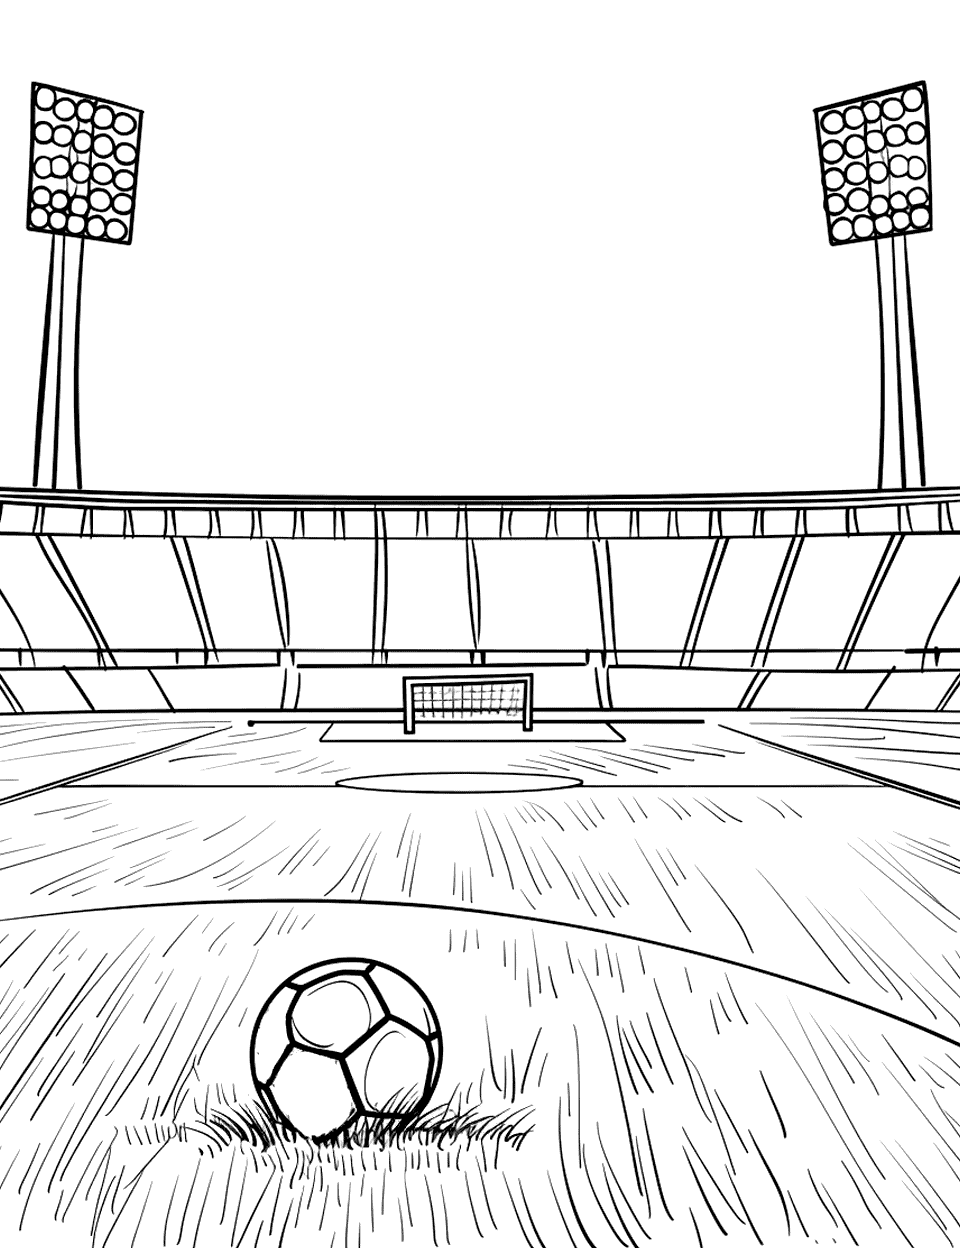 Stadium Lights at Night Soccer Coloring Page - A soccer stadium lit up at night, empty and majestic, waiting for the next day’s game.